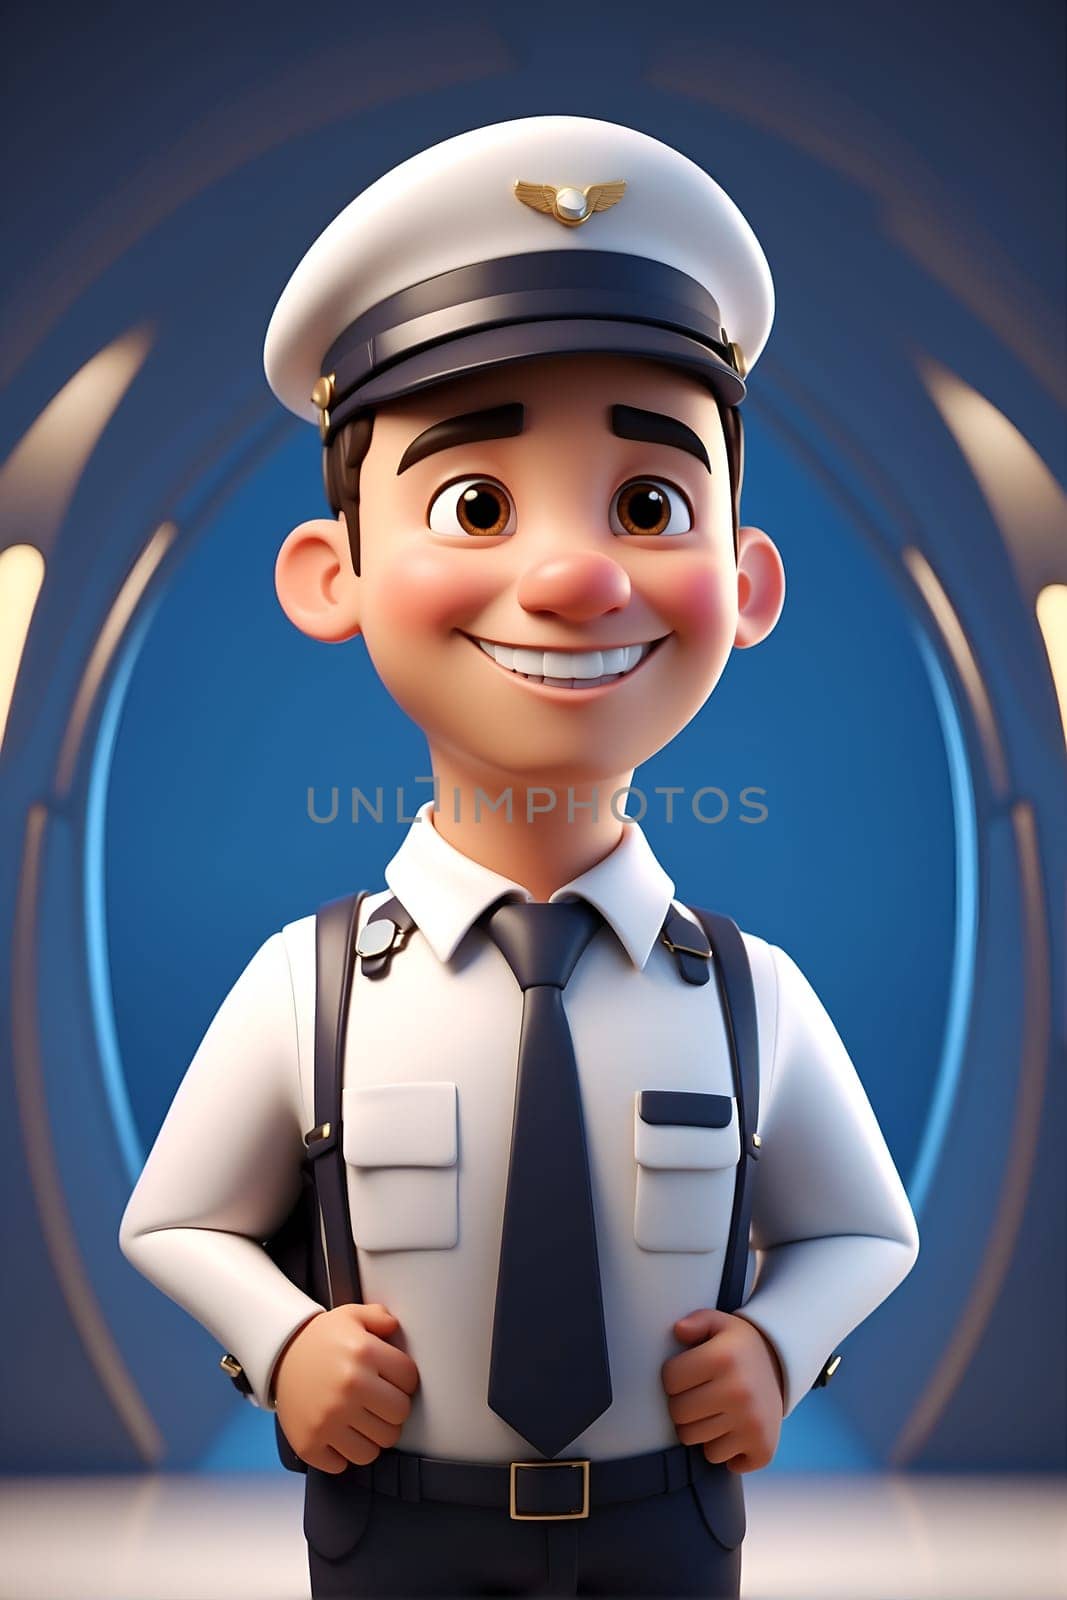 This delightful cartoon character is dressed as a pilot, ready to explore the skies.